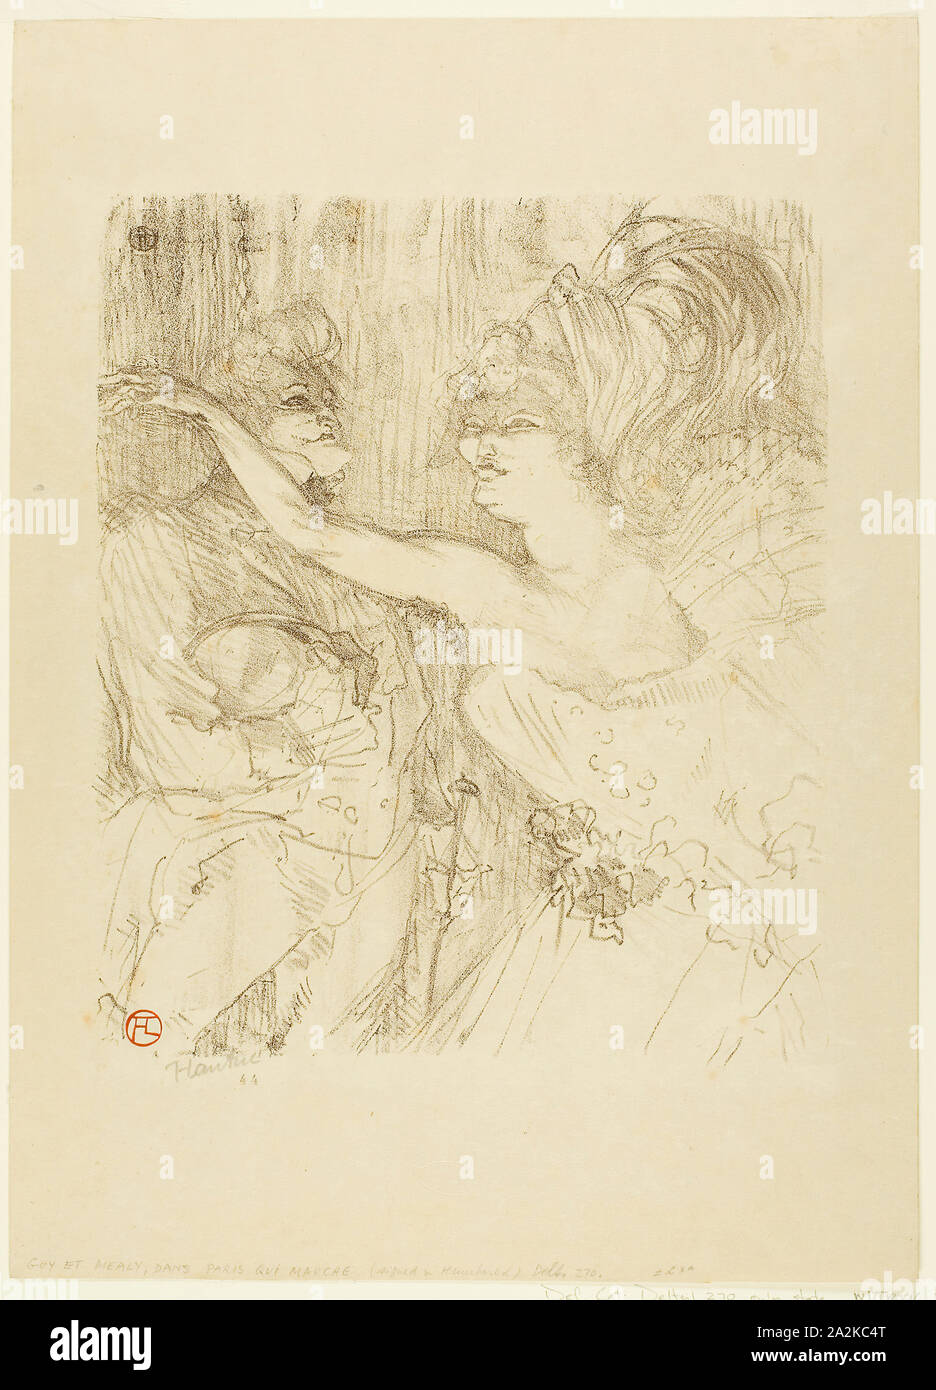 Guy and Mealy, in ‘Paris qui Marche’, 1898, Henri de Toulouse-Lautrec, French, 1864-1901, France, Color lithograph on cream wove paper, 277 × 233 mm (image), 401 × 288 mm (sheet Stock Photo